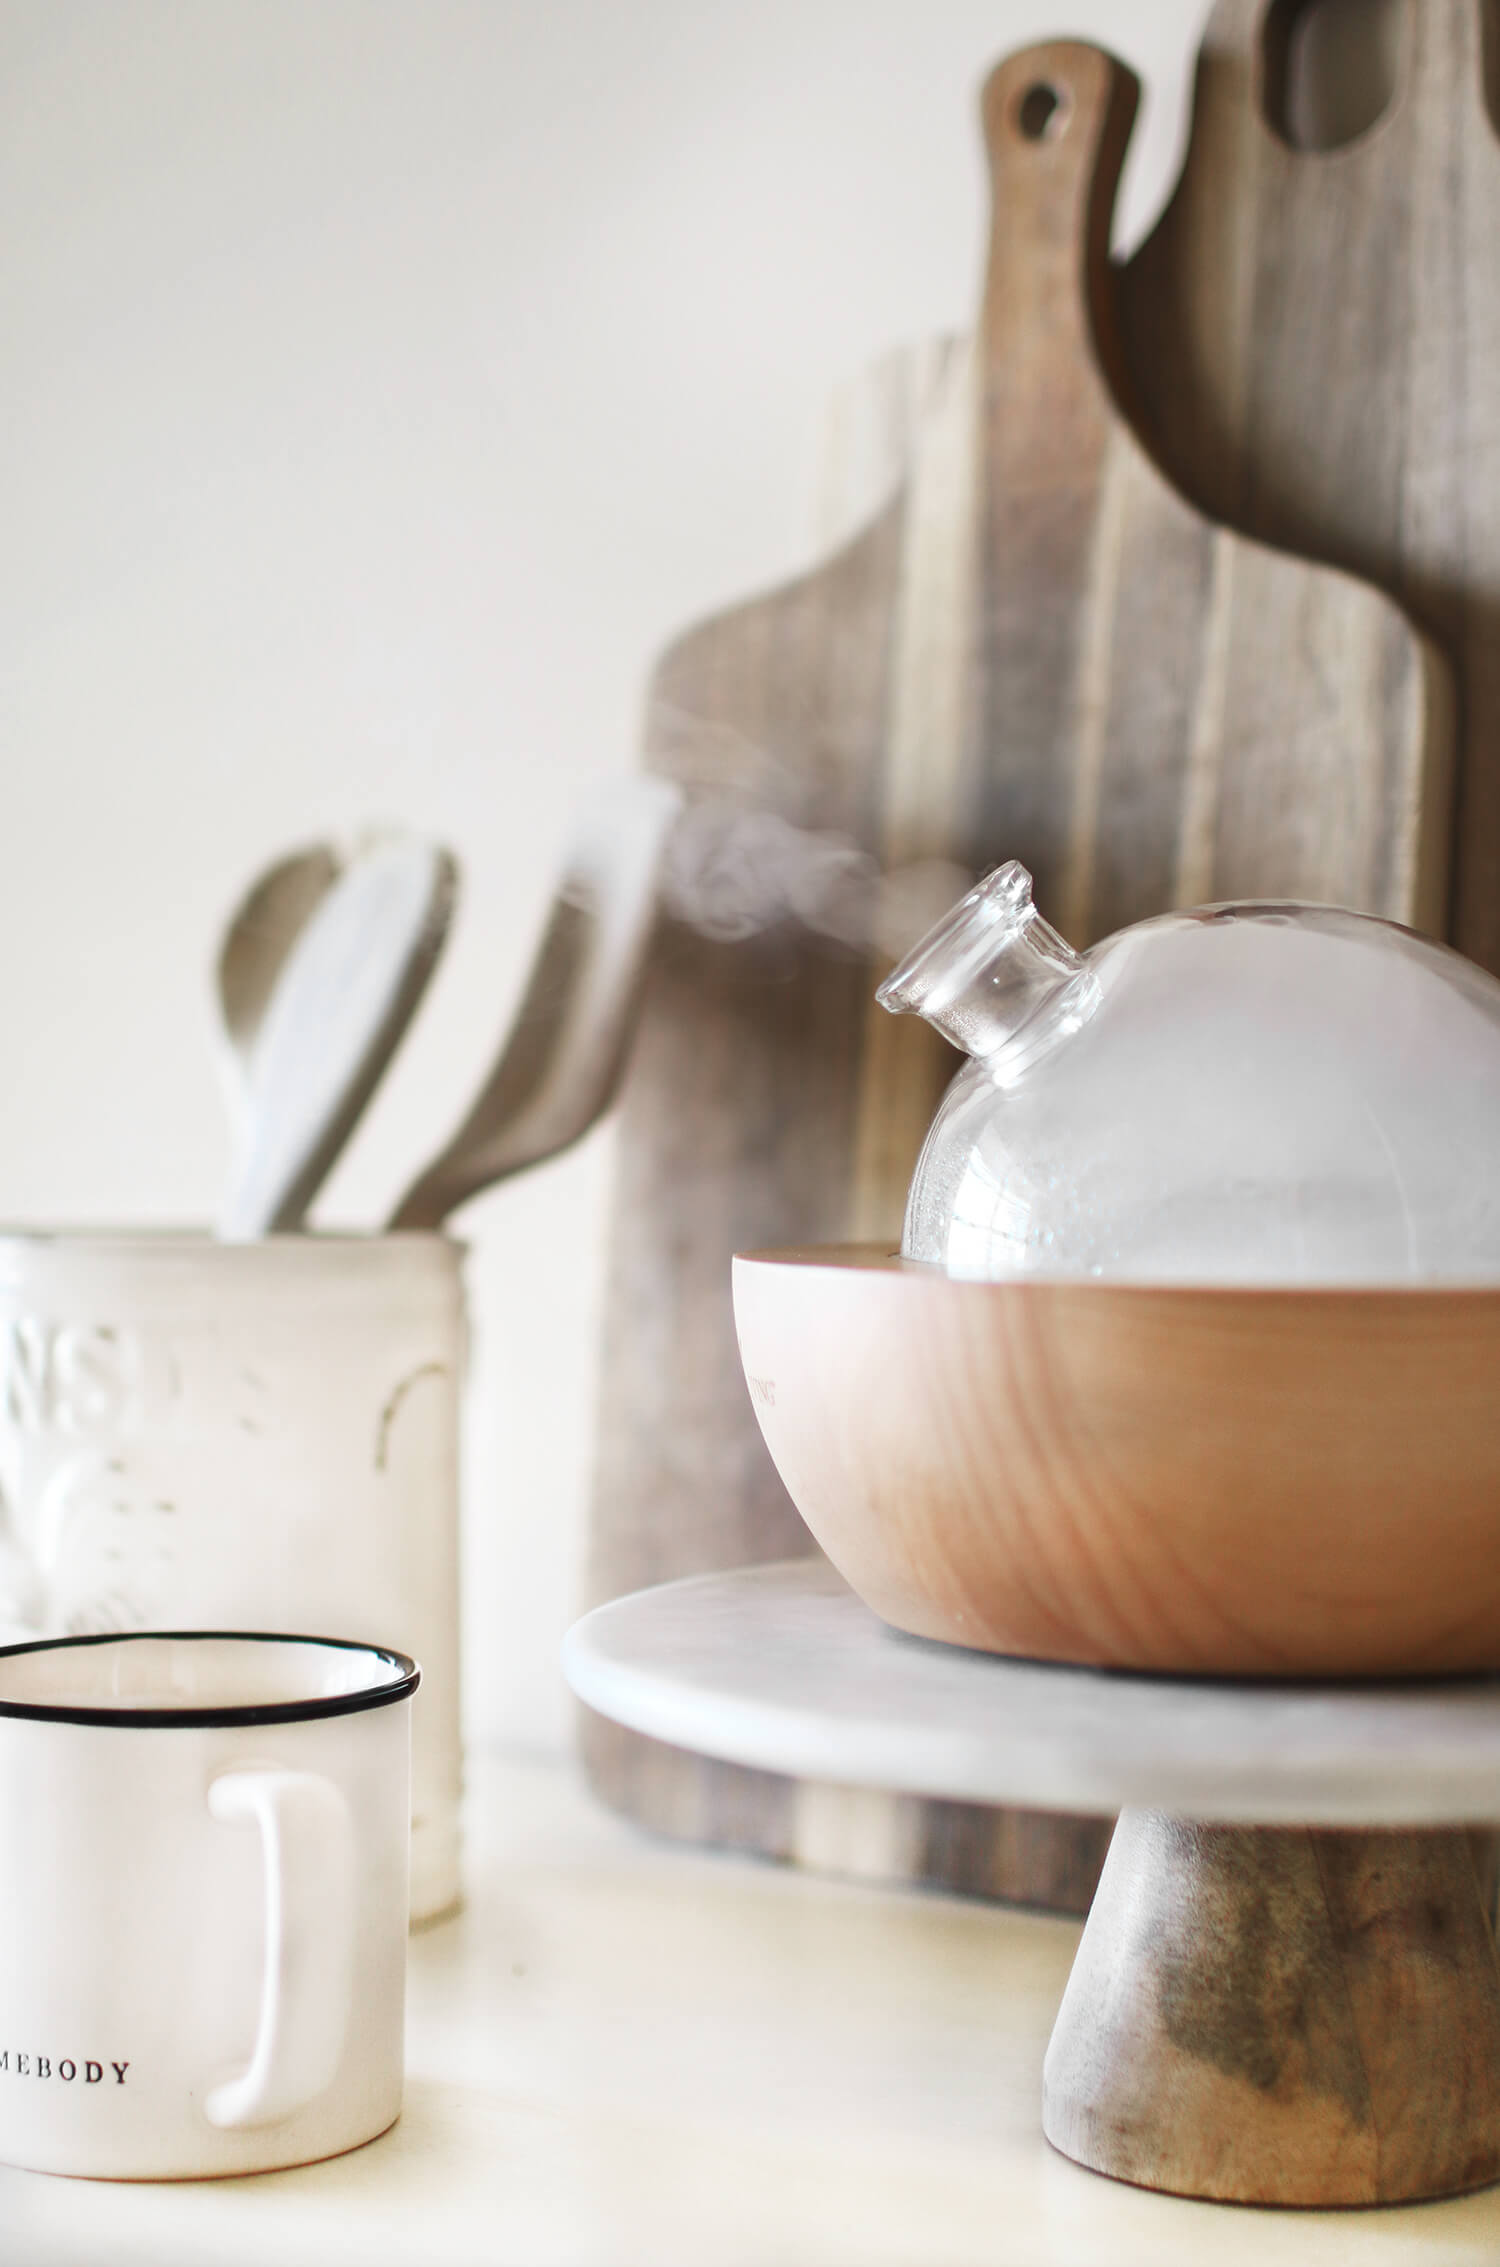 Sharing all about how I make our home smell like Anthropologie's Volcano scent along with more candle scents I use to love. It brings a whole cozy vibe that I can't get enough of in our home. Catch it all over on KaraLayne.com!